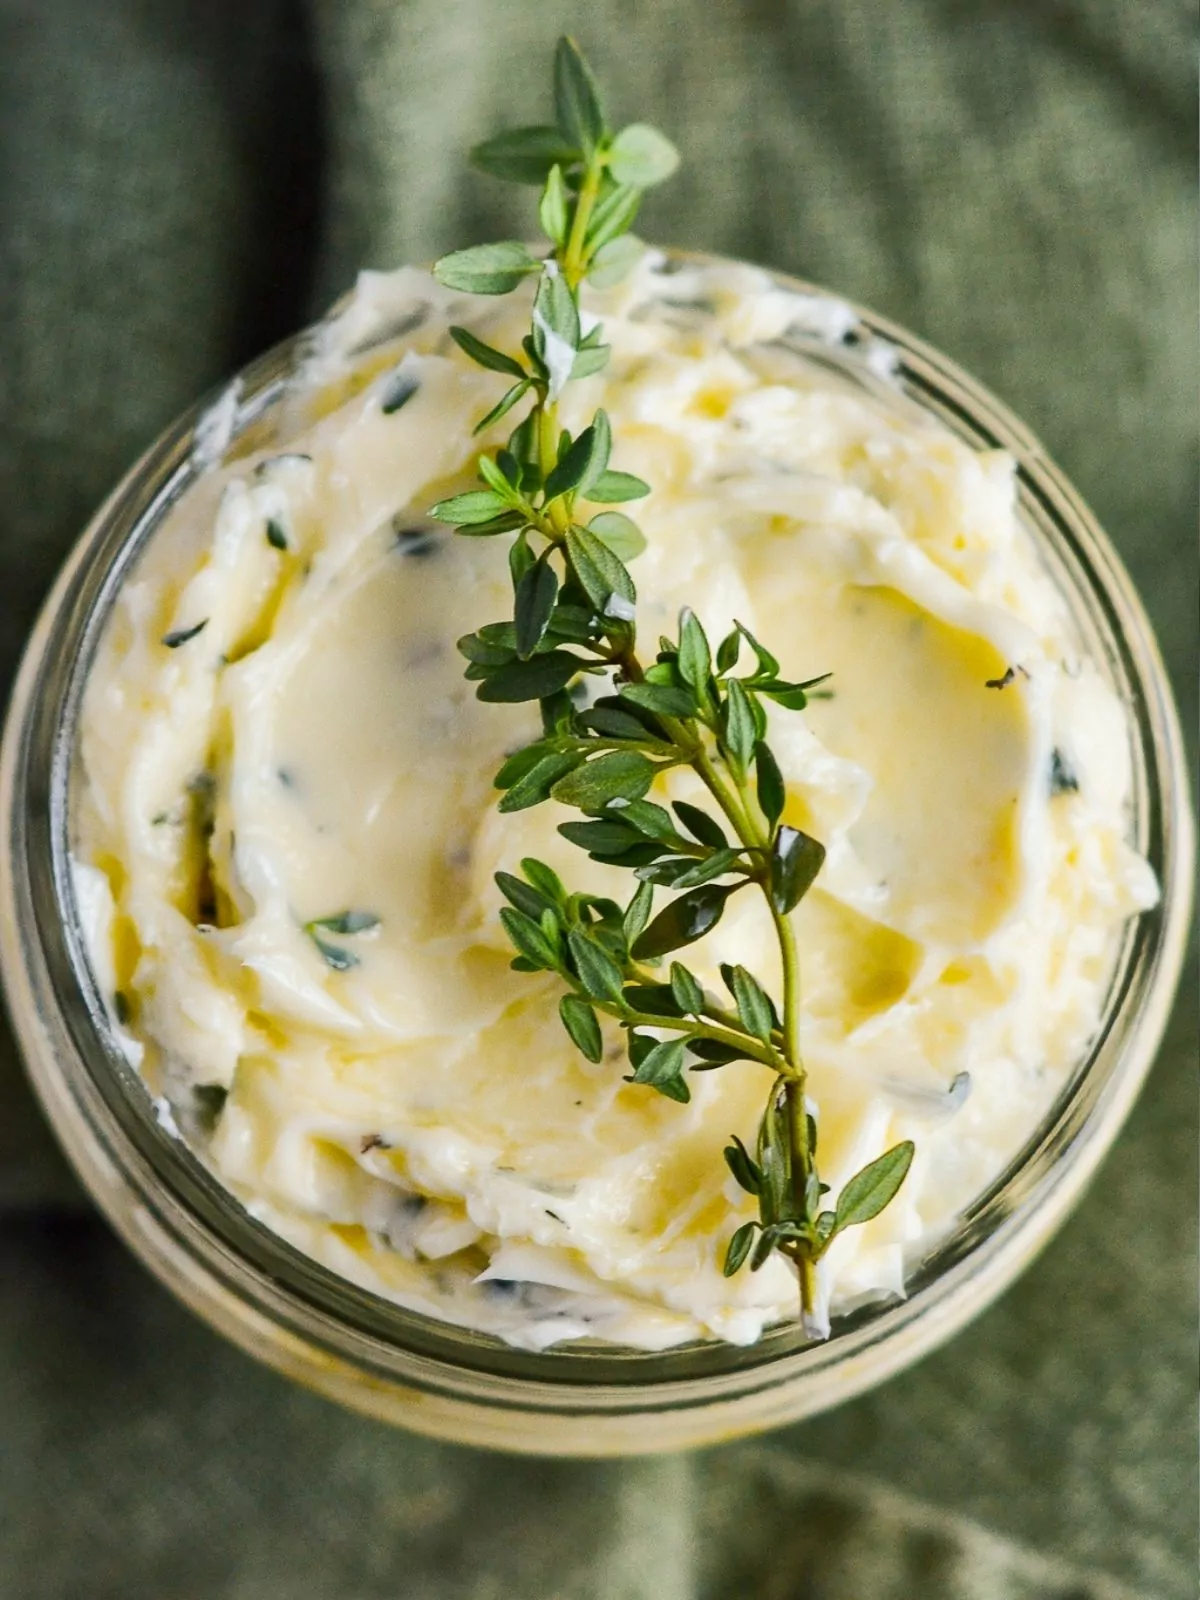 sprig of rosemary on top of mason jar with butter.